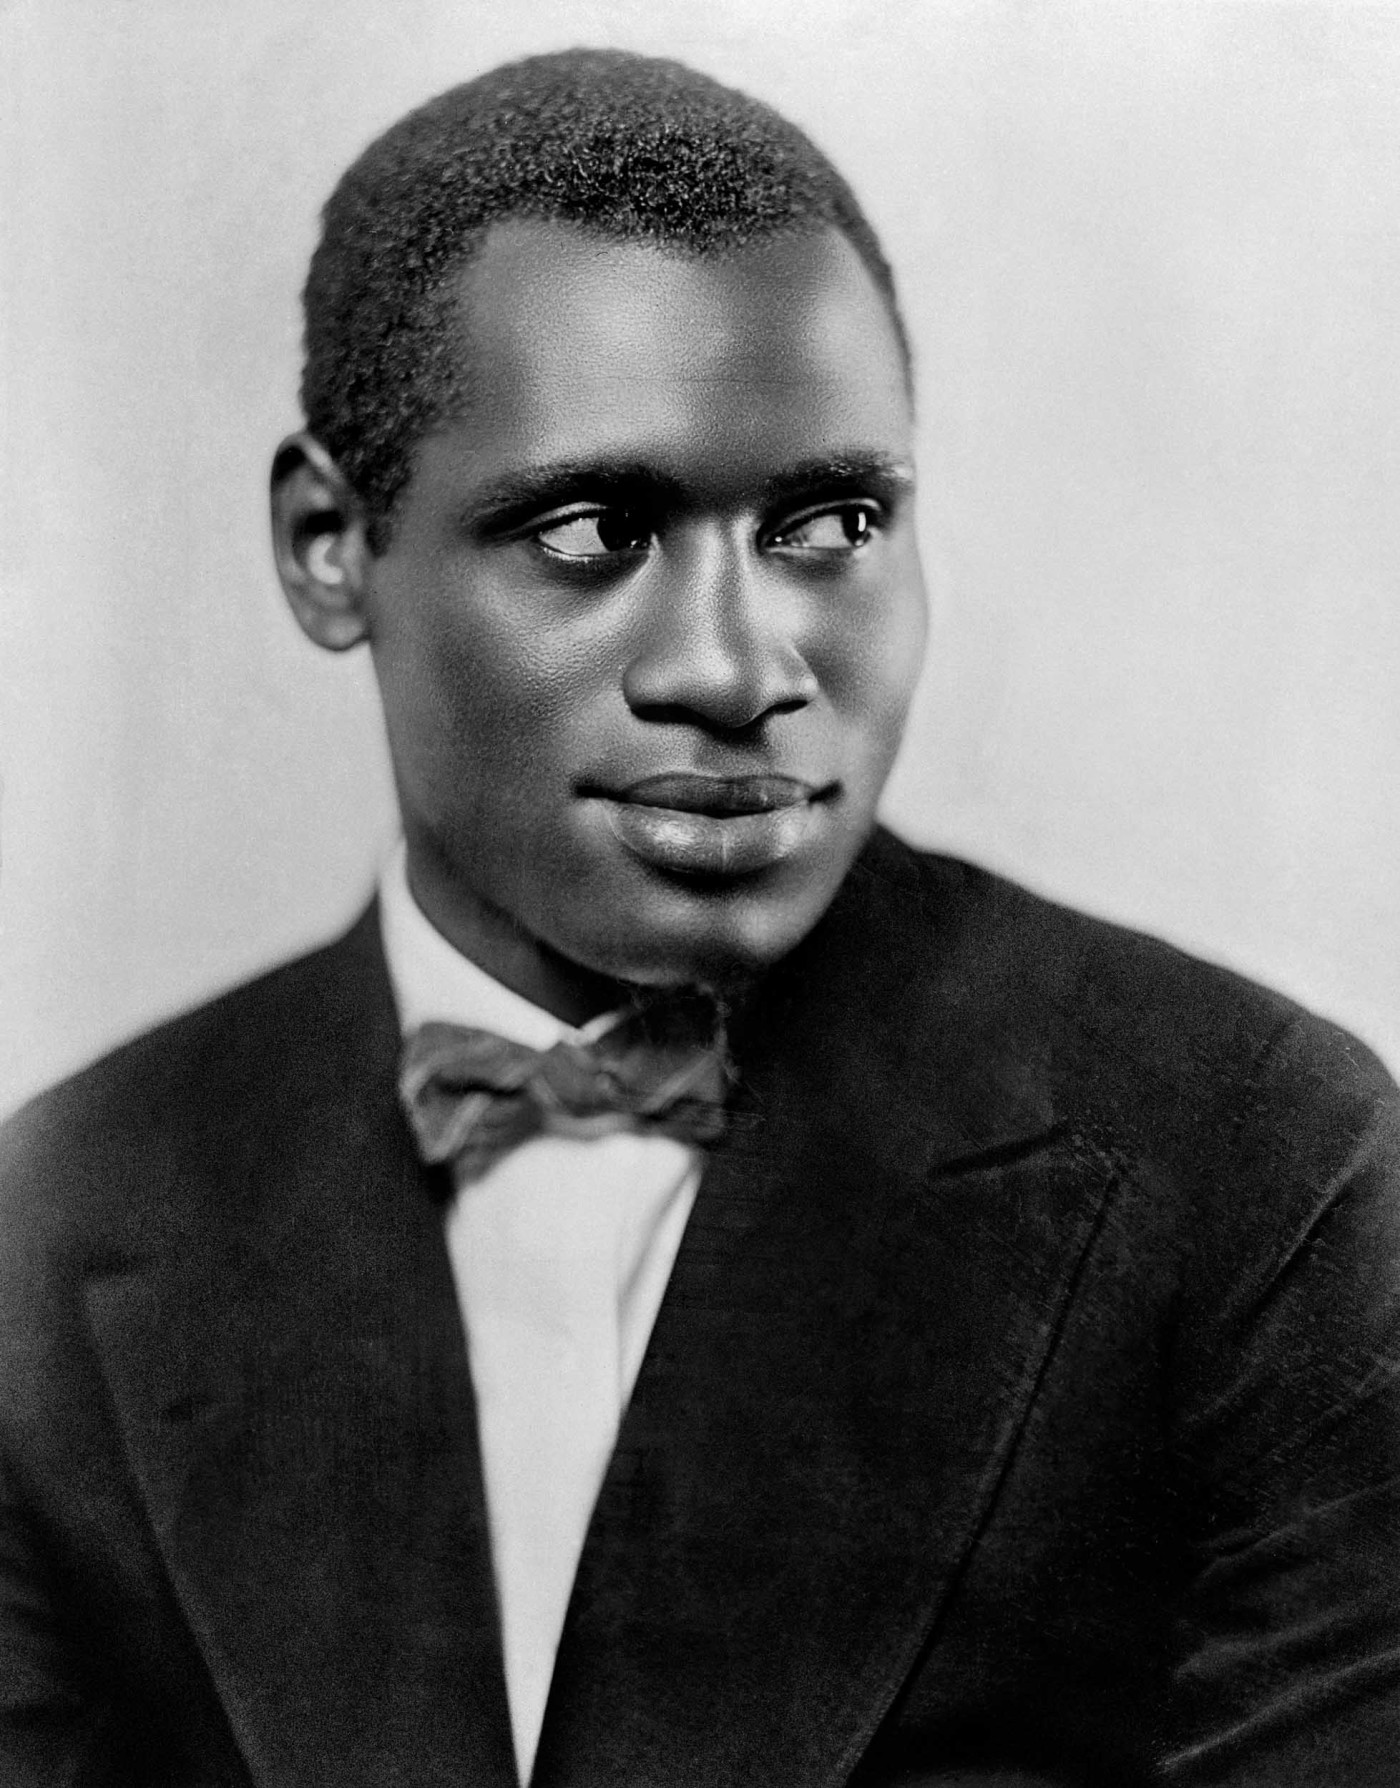 Photograph of Paul Robeson